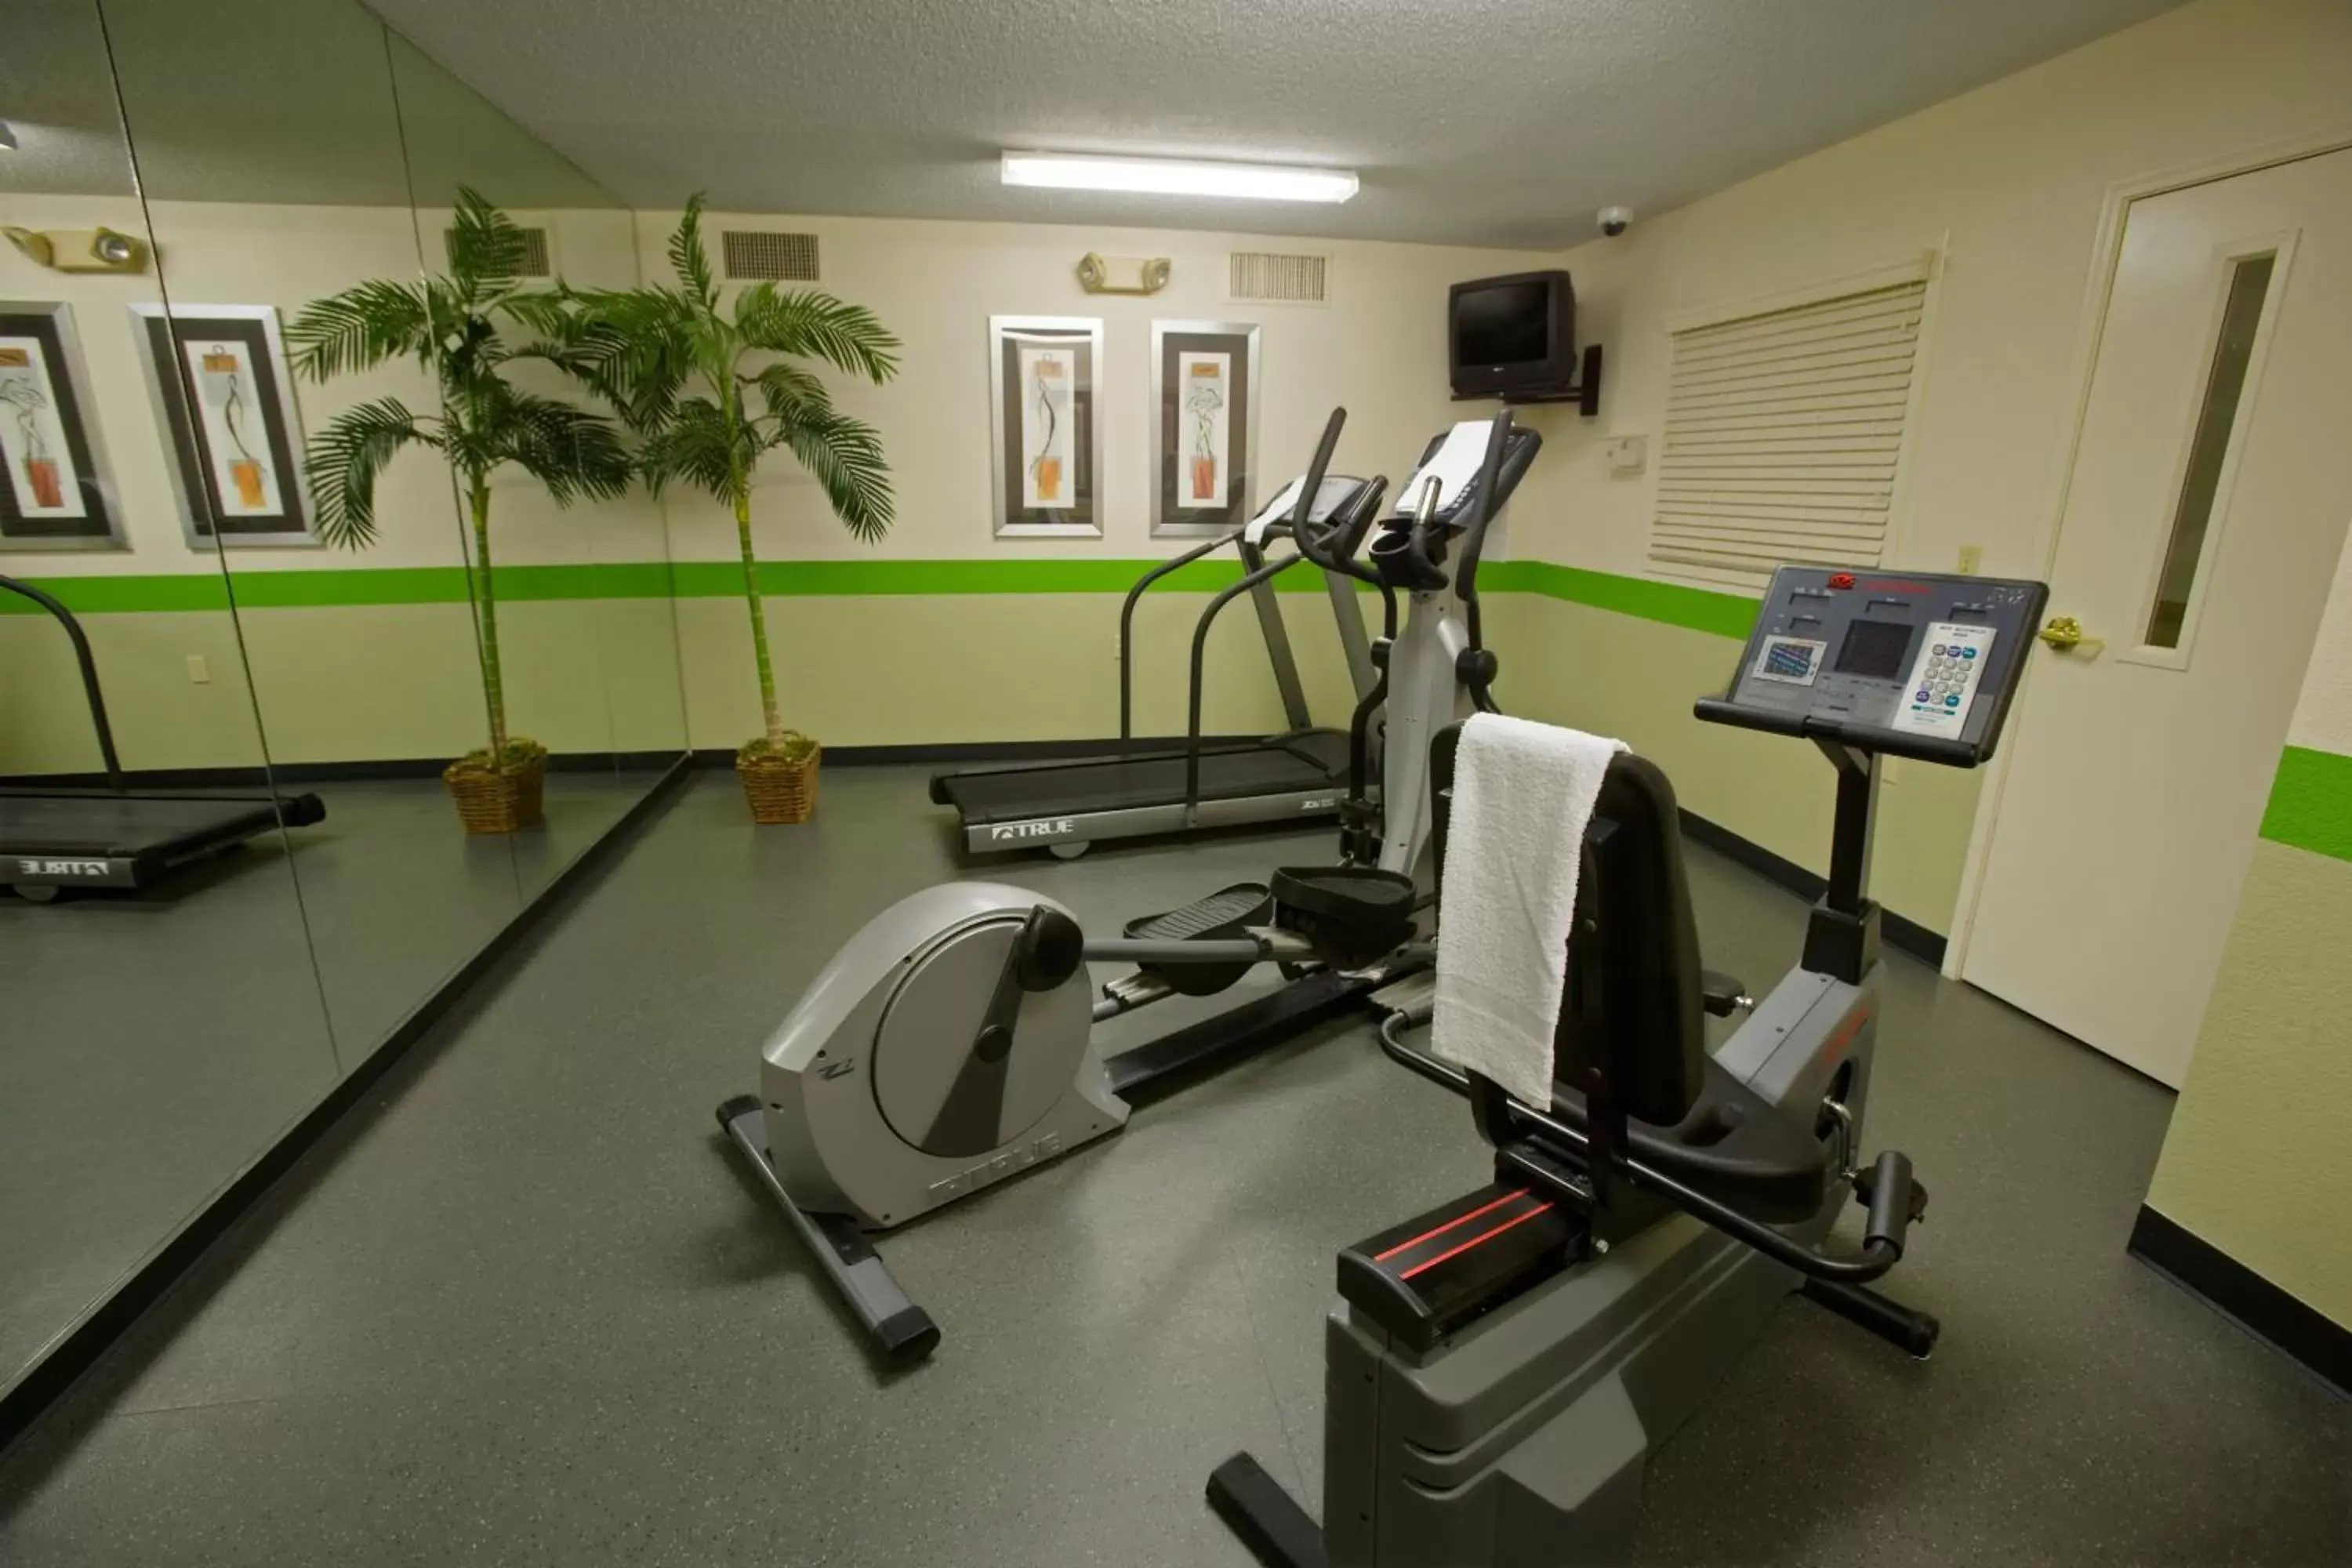 Fitness centre/facilities, Fitness Center/Facilities in Extended Stay America Suites - Washington, D.C. - Gaithersburg - South